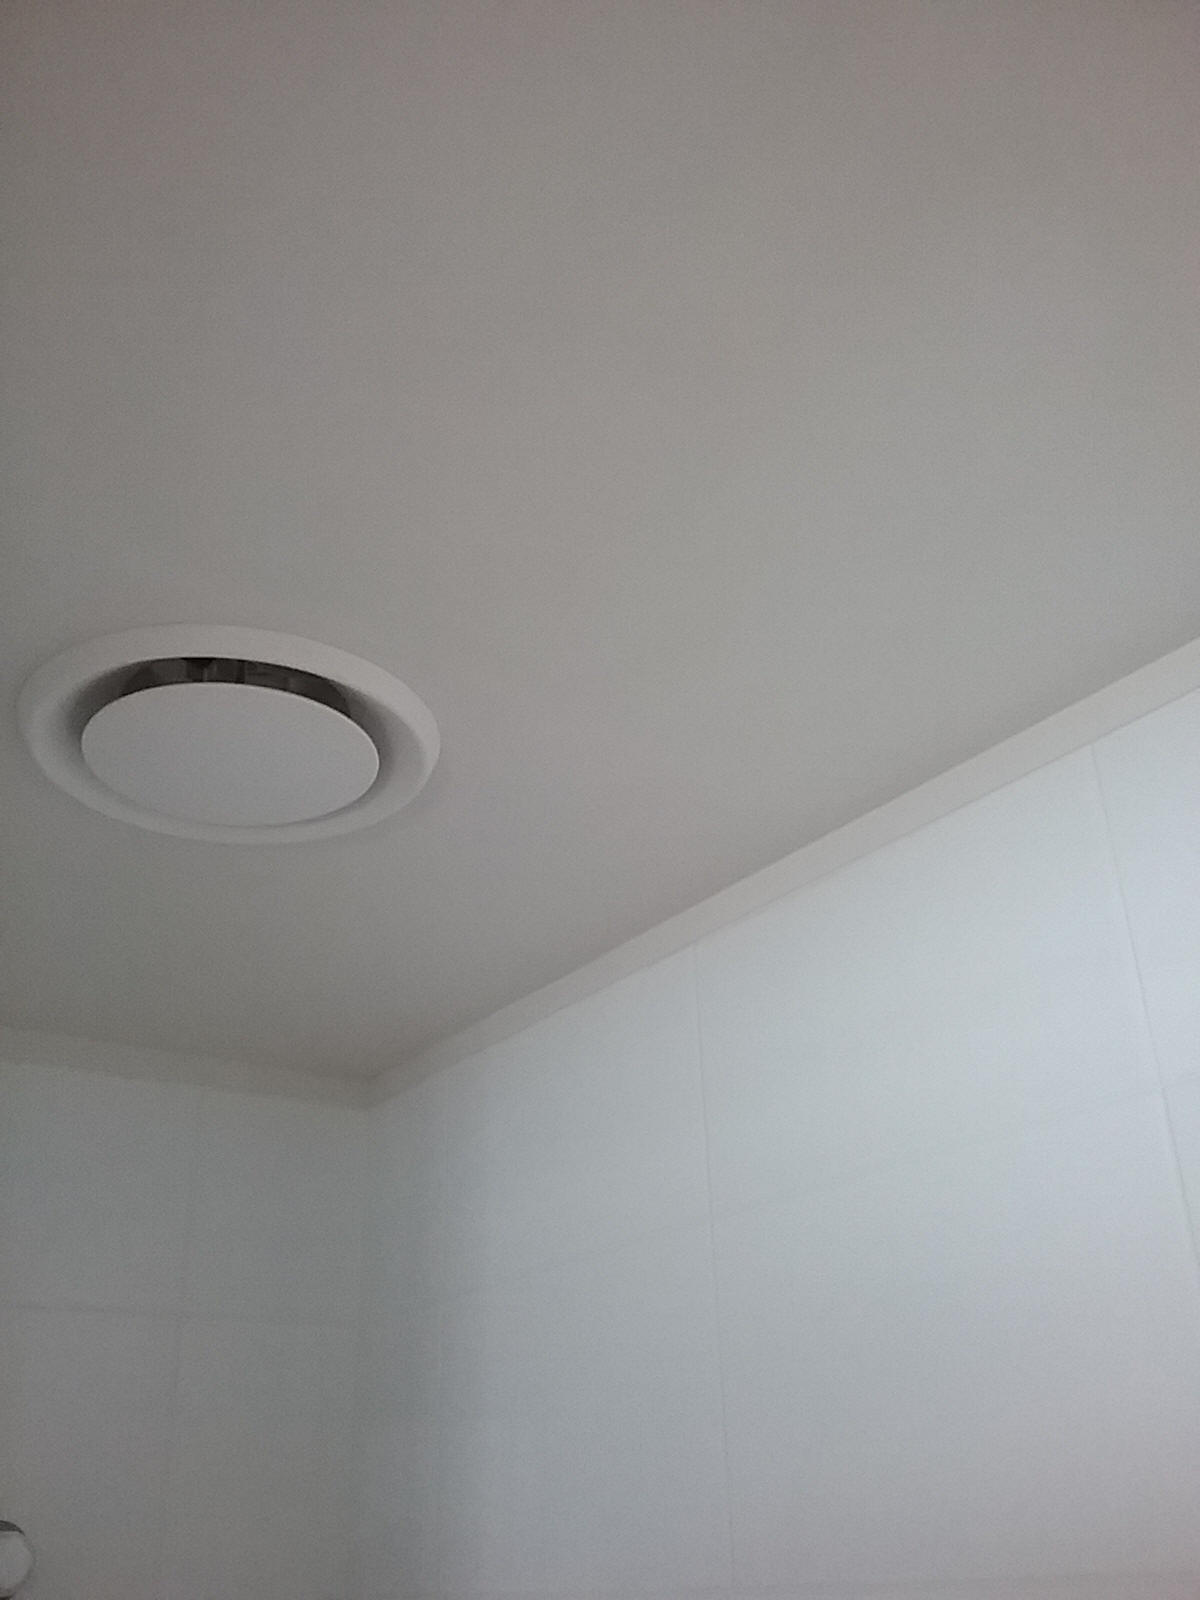 Hole in ceiling fixed